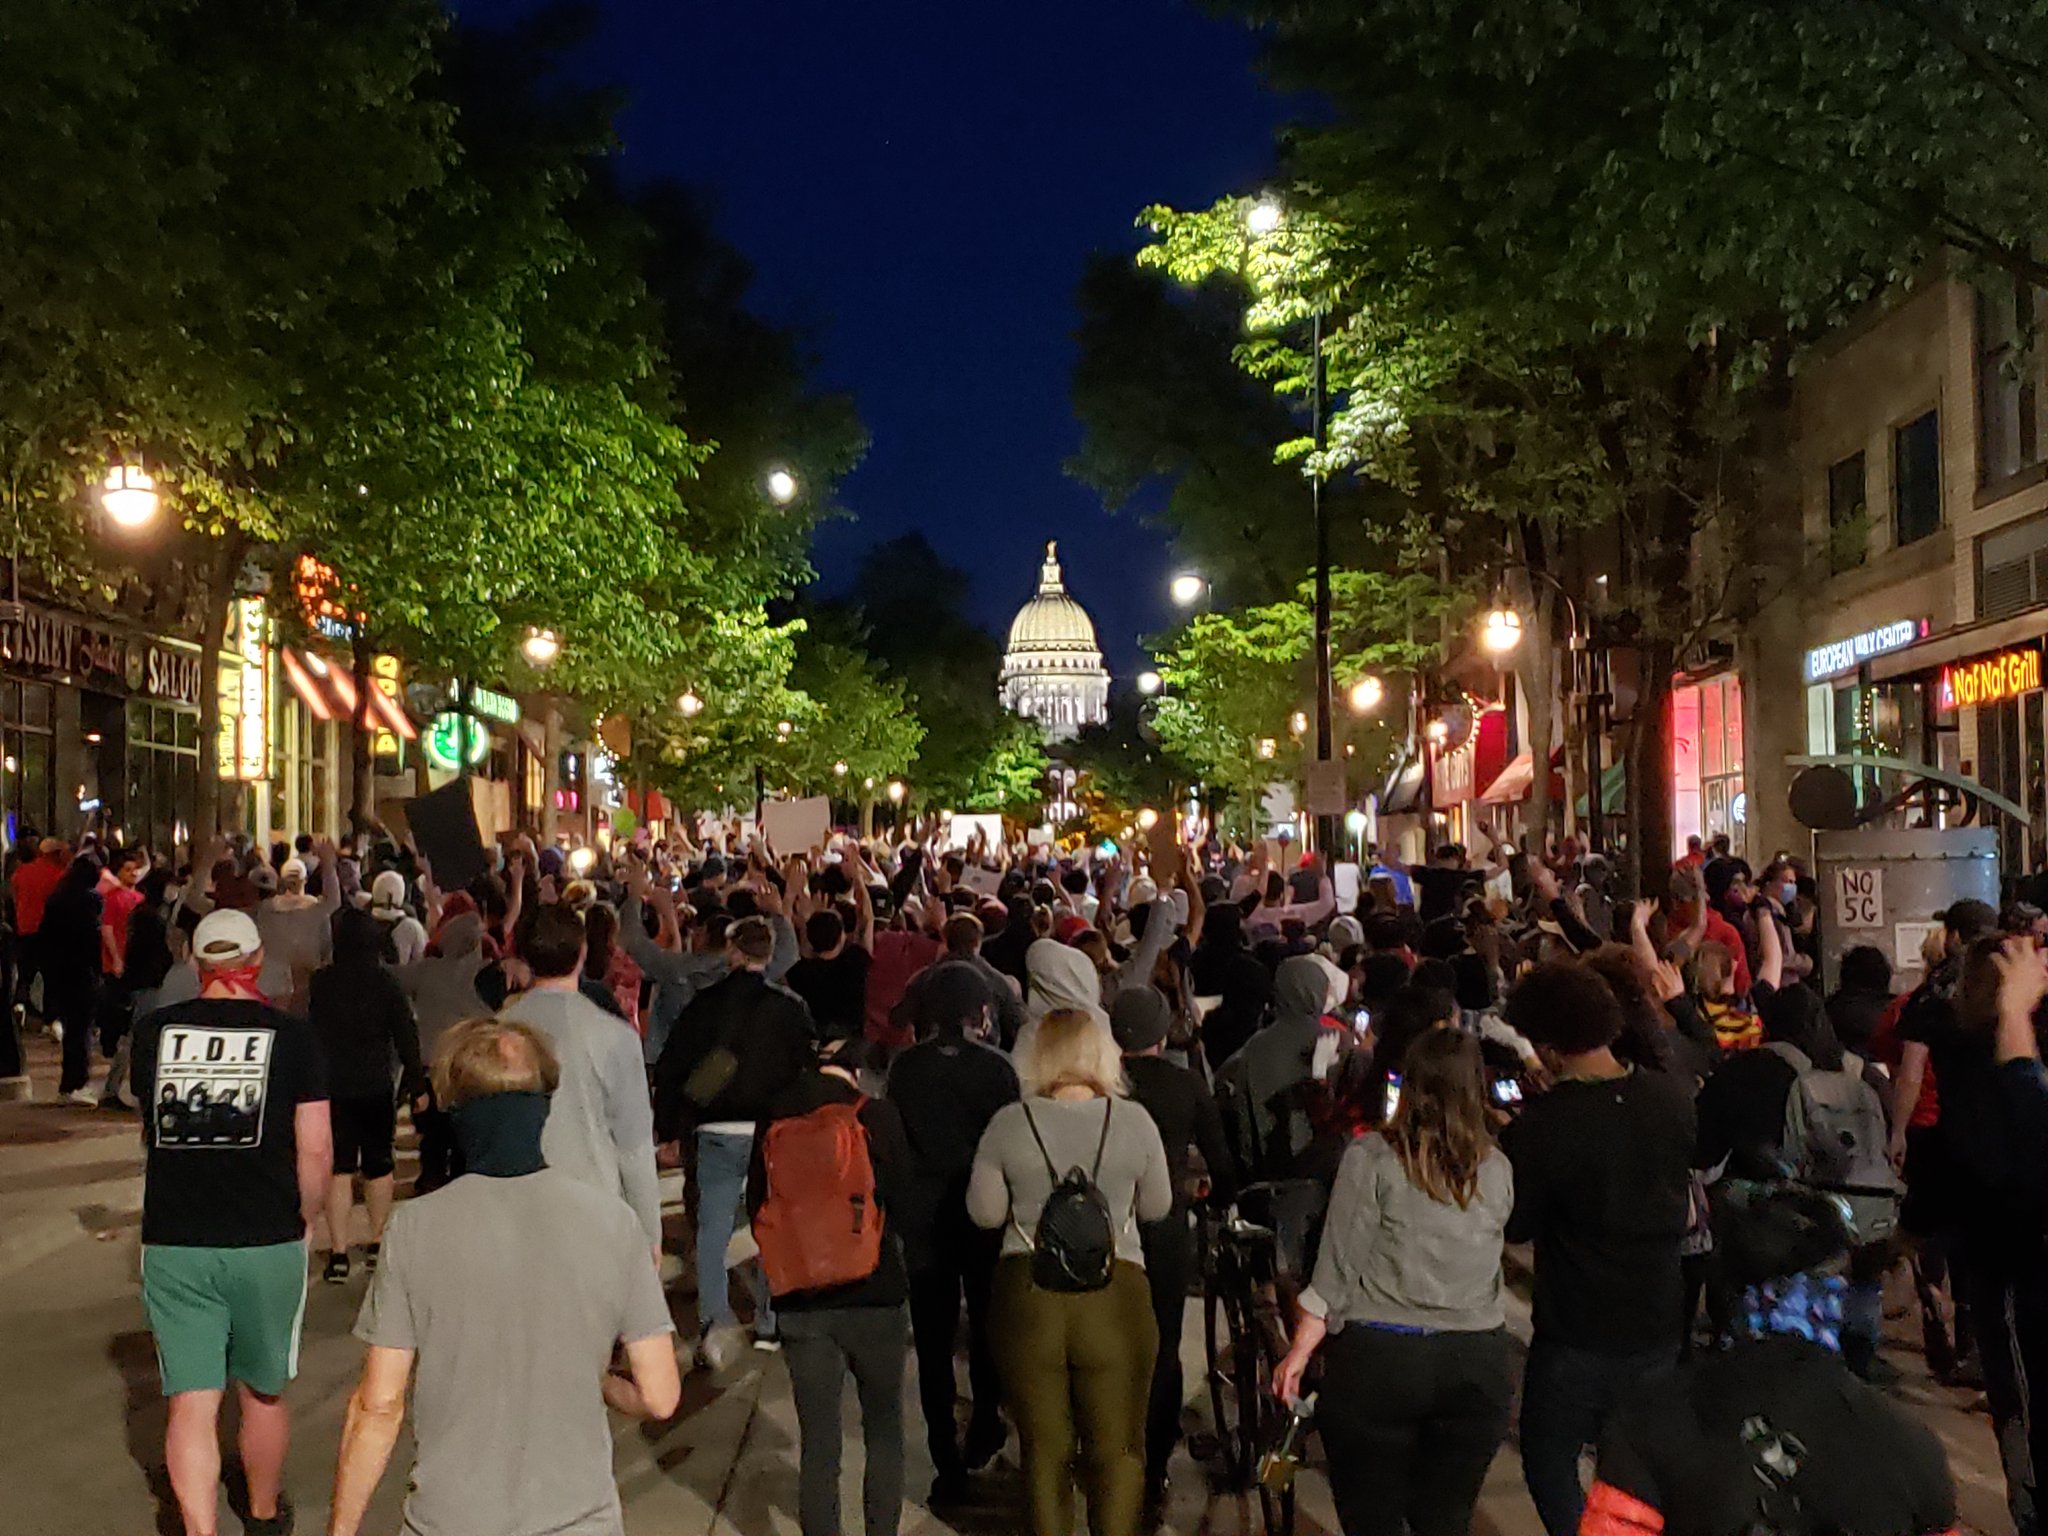 A few hundred protesters returned to State Street in downtown Madison on Sunday night, defying a curfew imposed by the city's mayor.